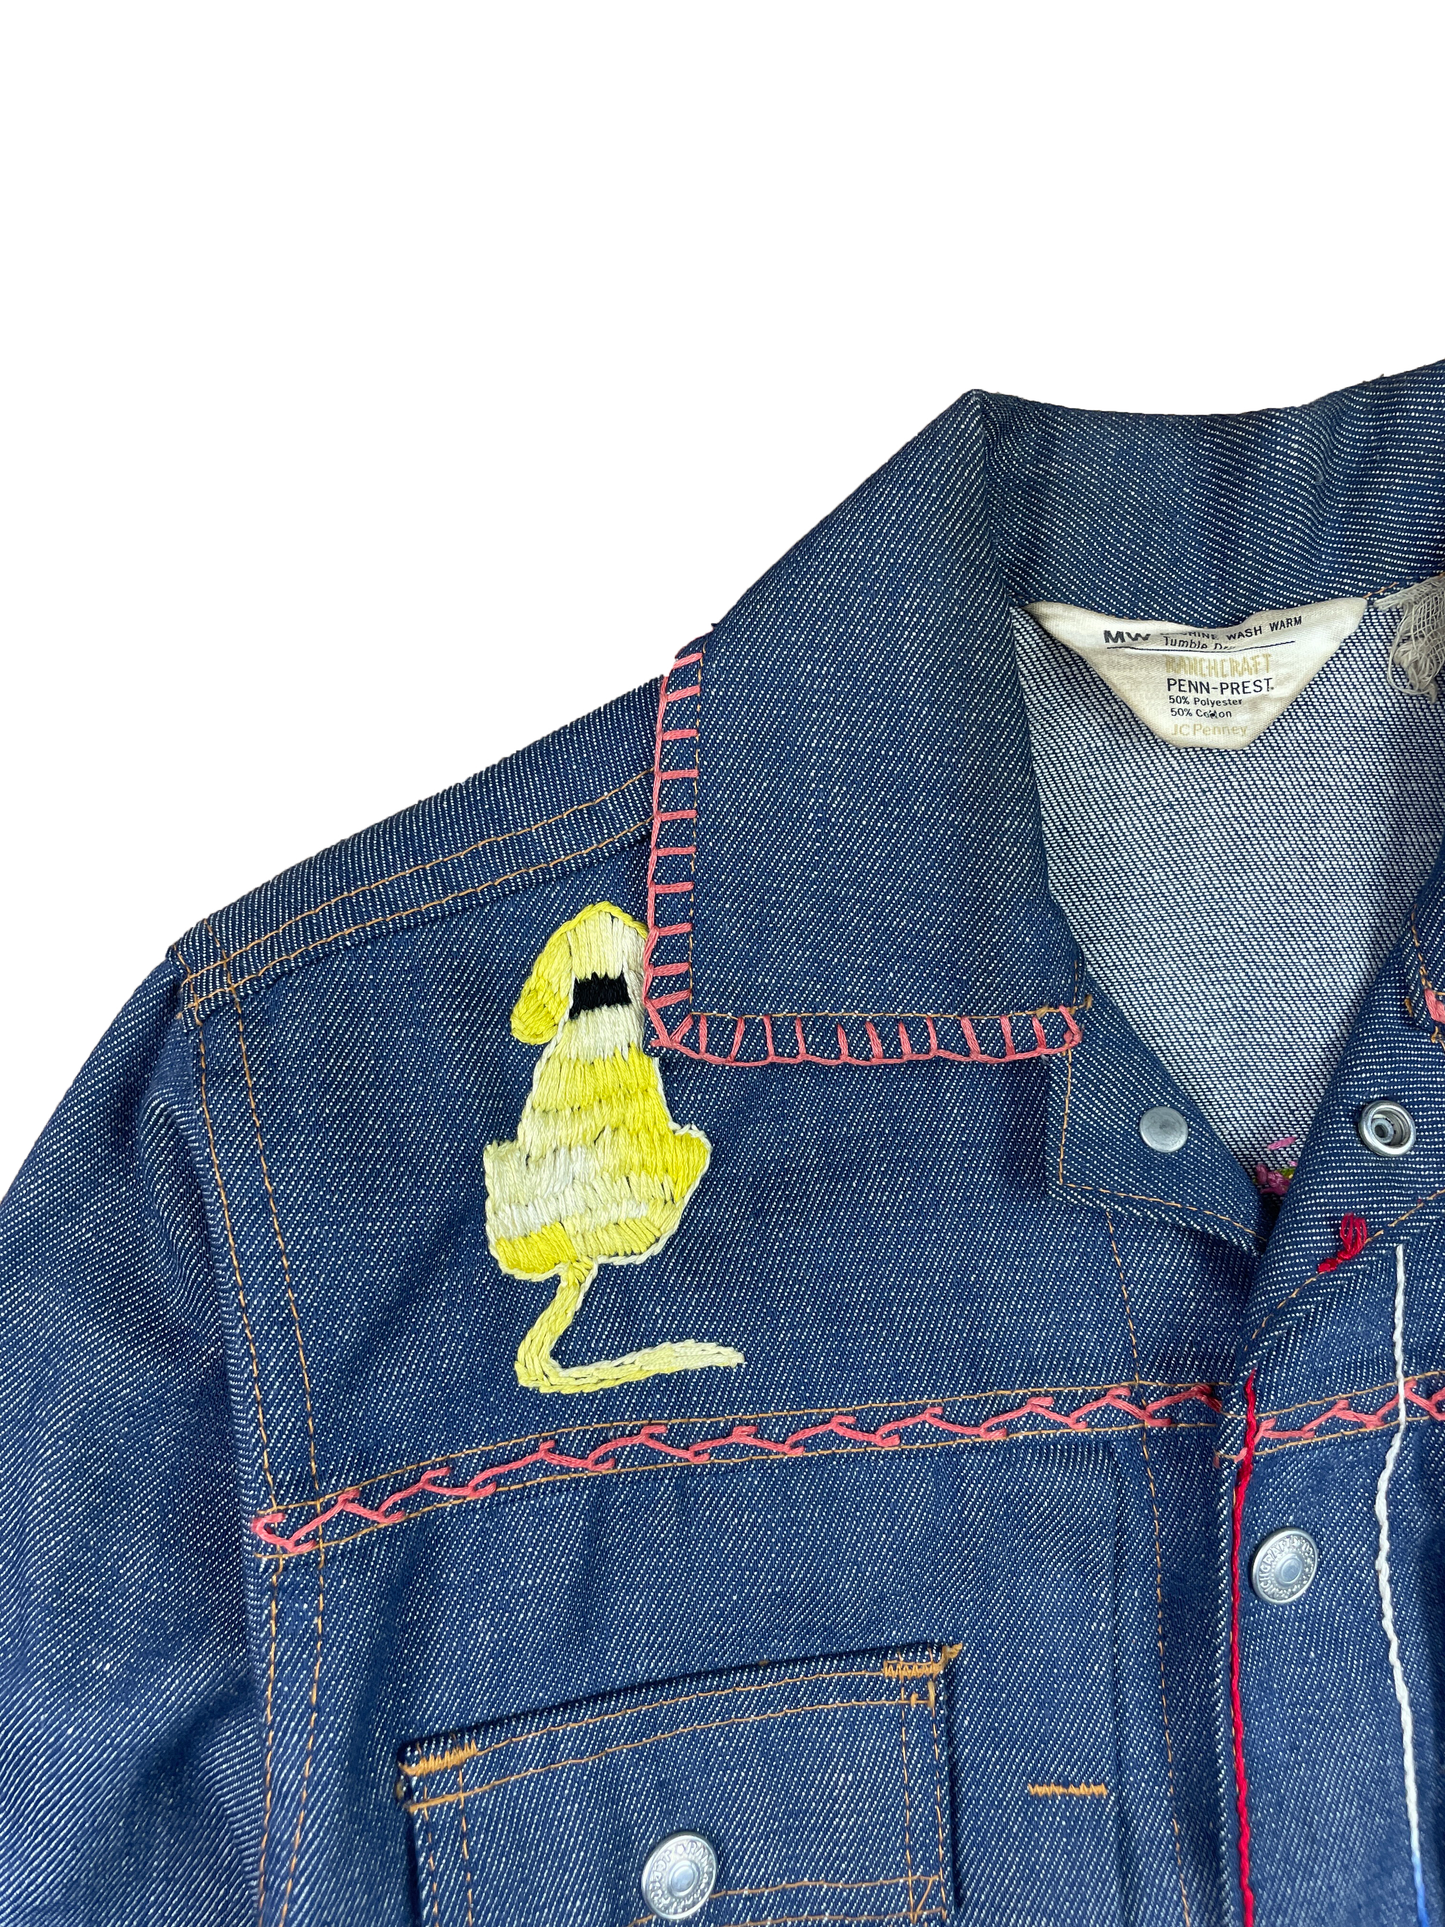 70s JCPenny Embroidered Denim Jacket // M